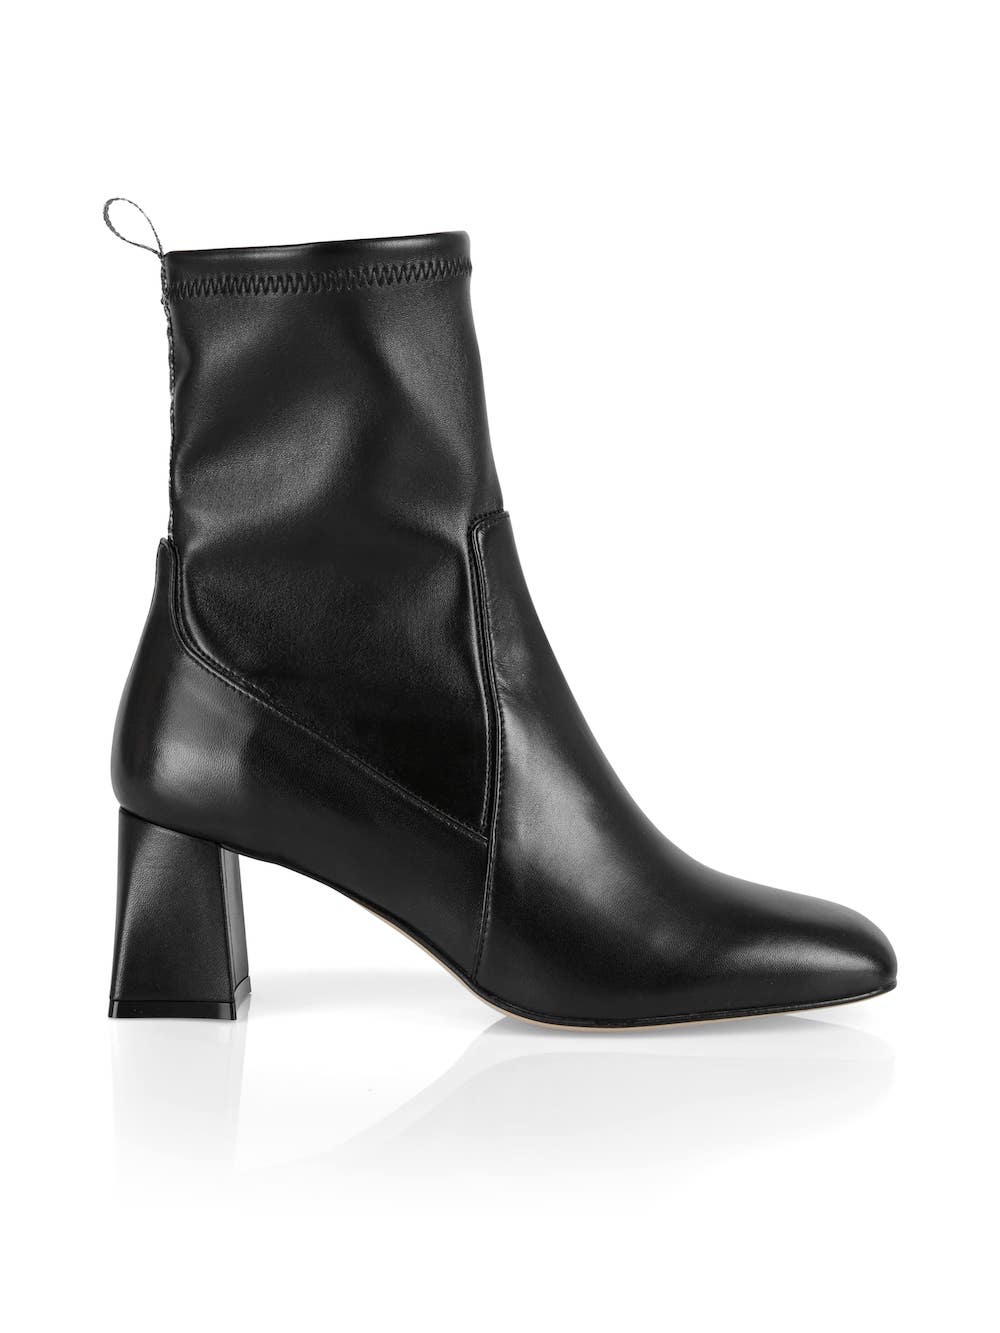 Black Square Toe Ankle Boots